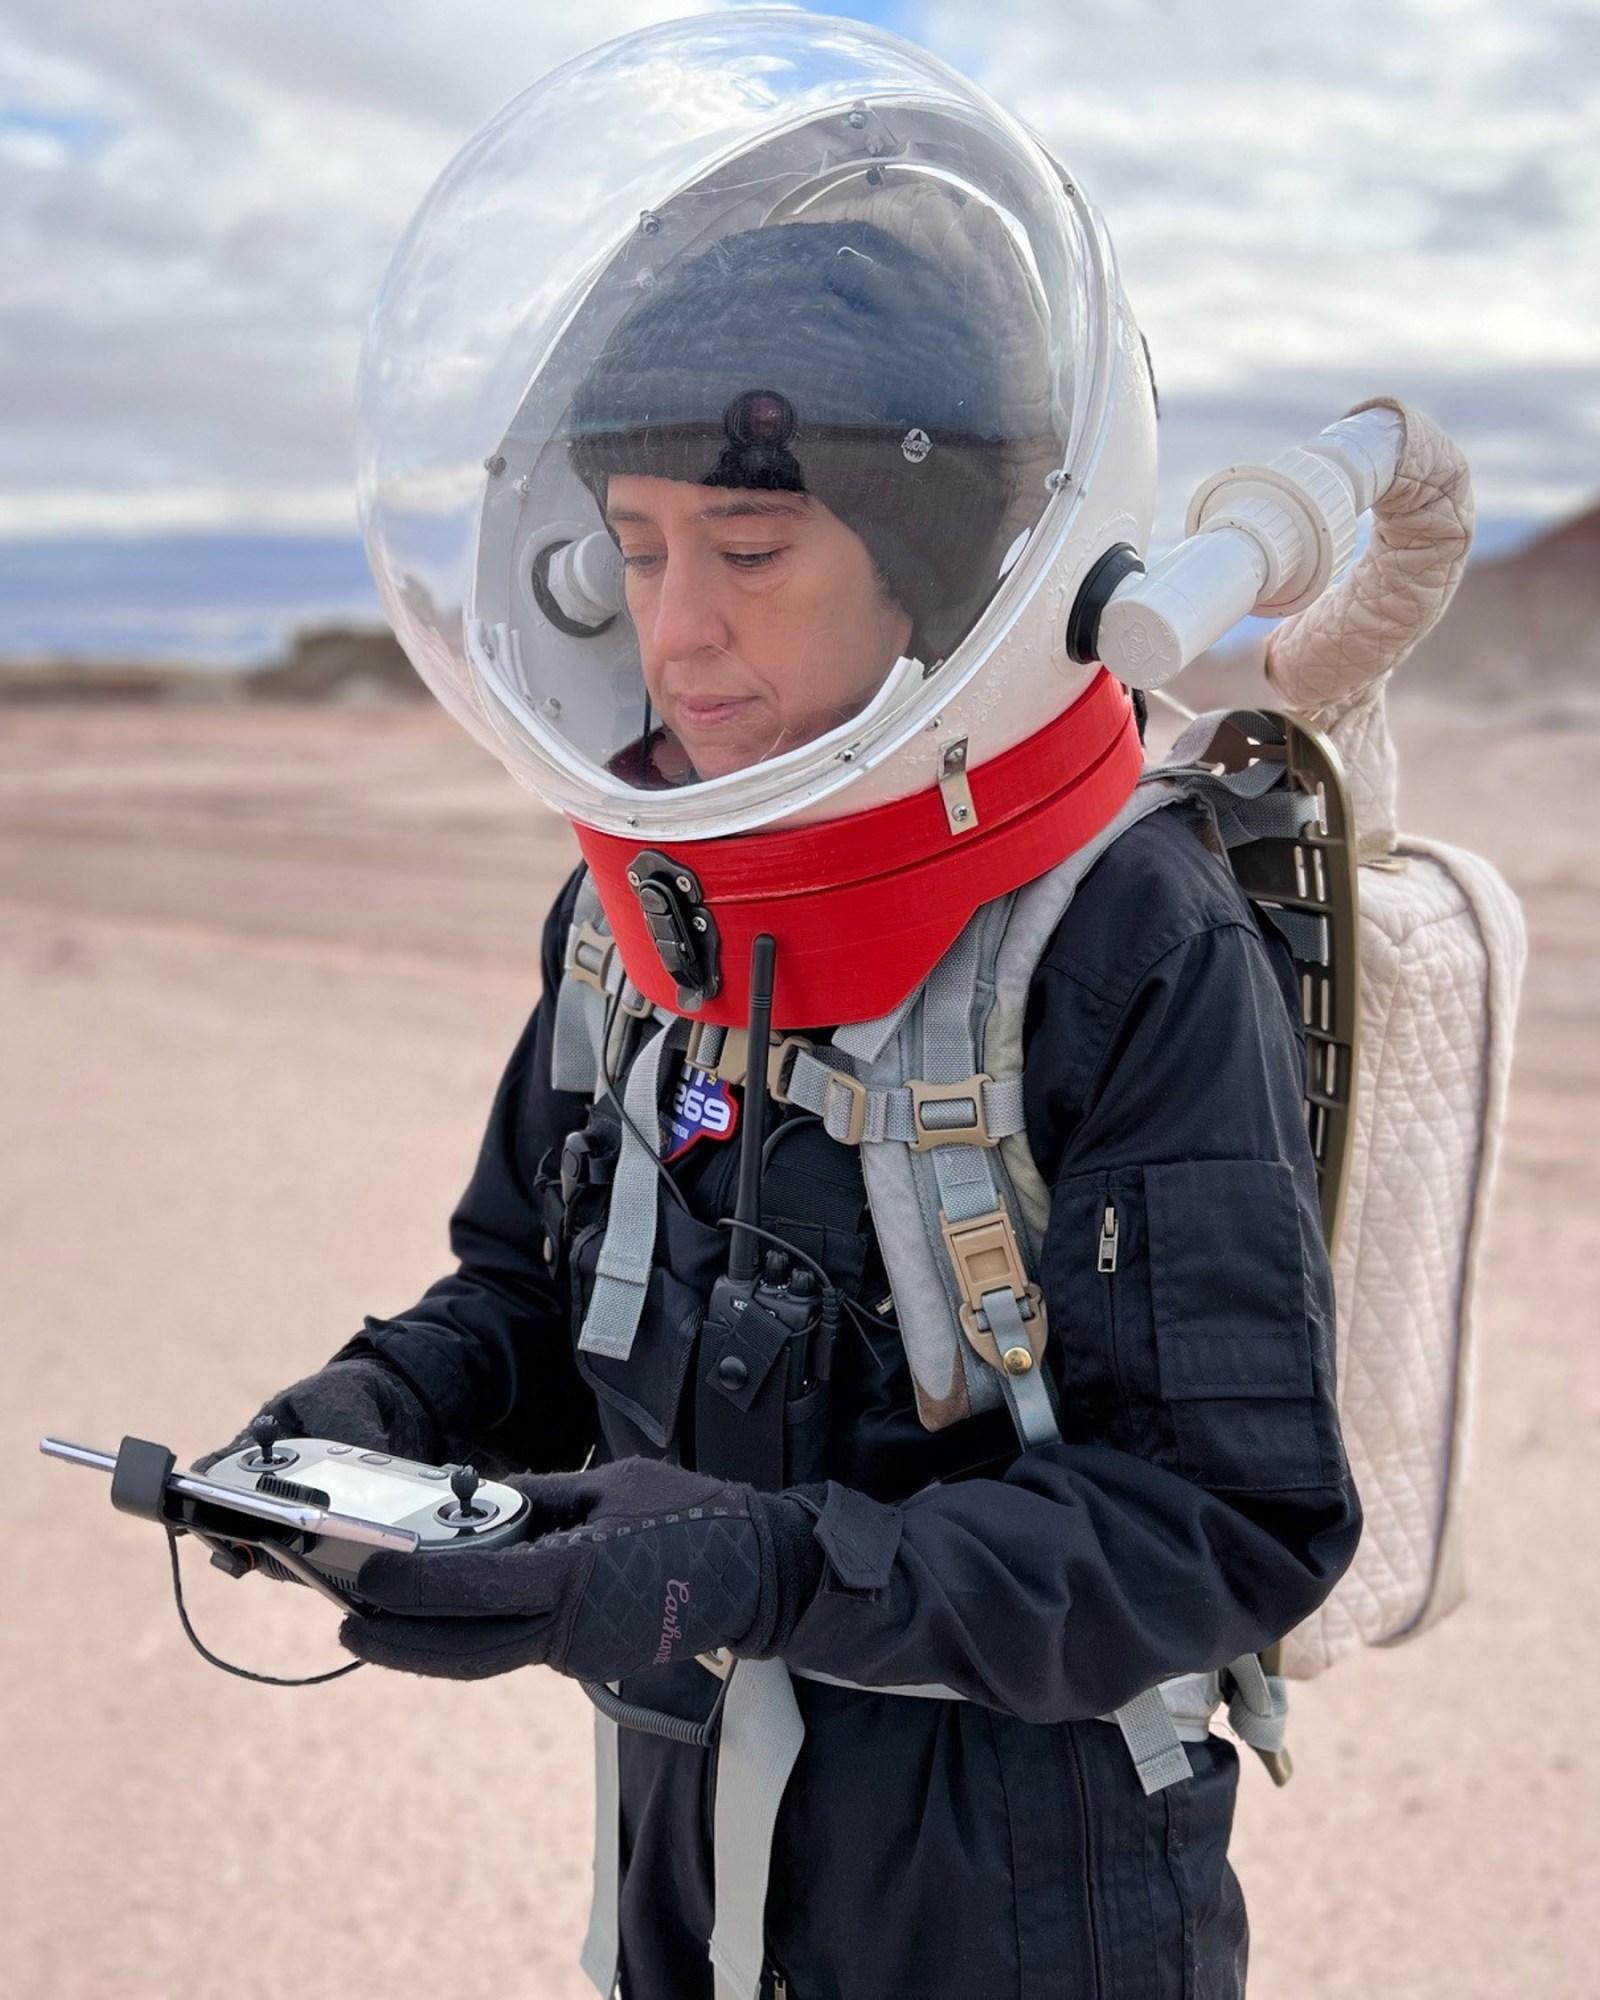 Braun in an analog mission in the desert wearing a spacesuit